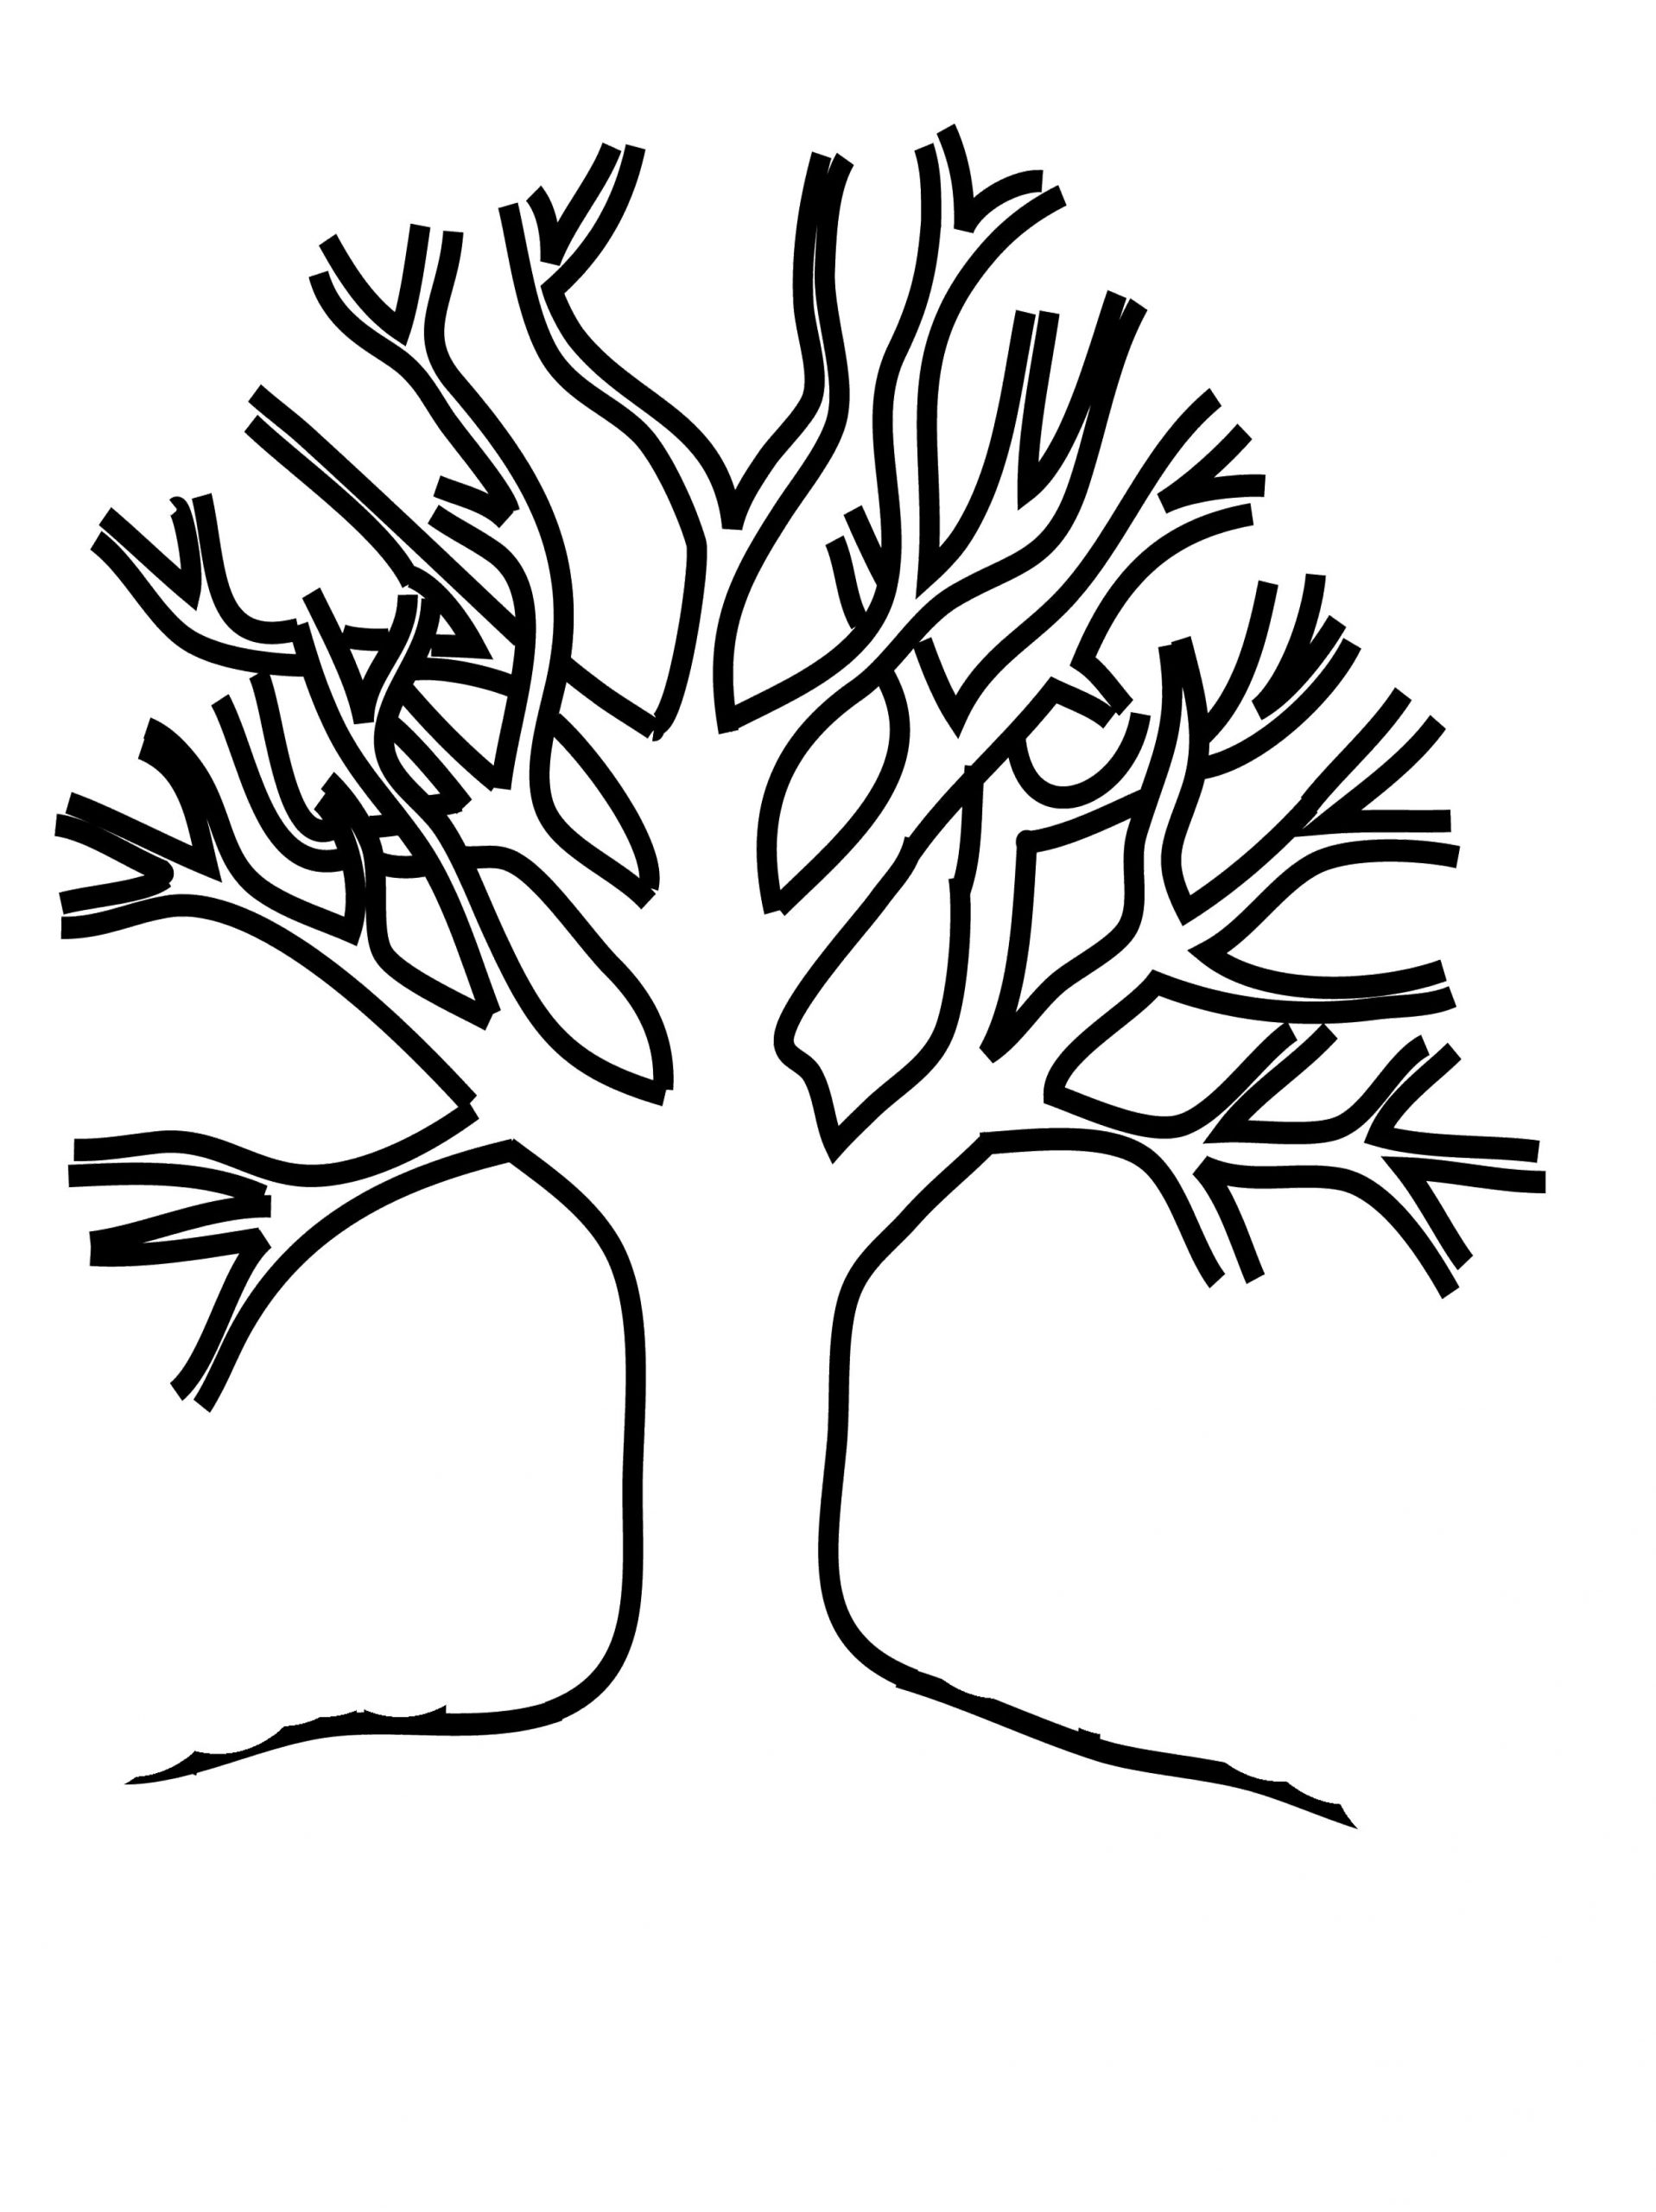 Coloring tree without leaves for free